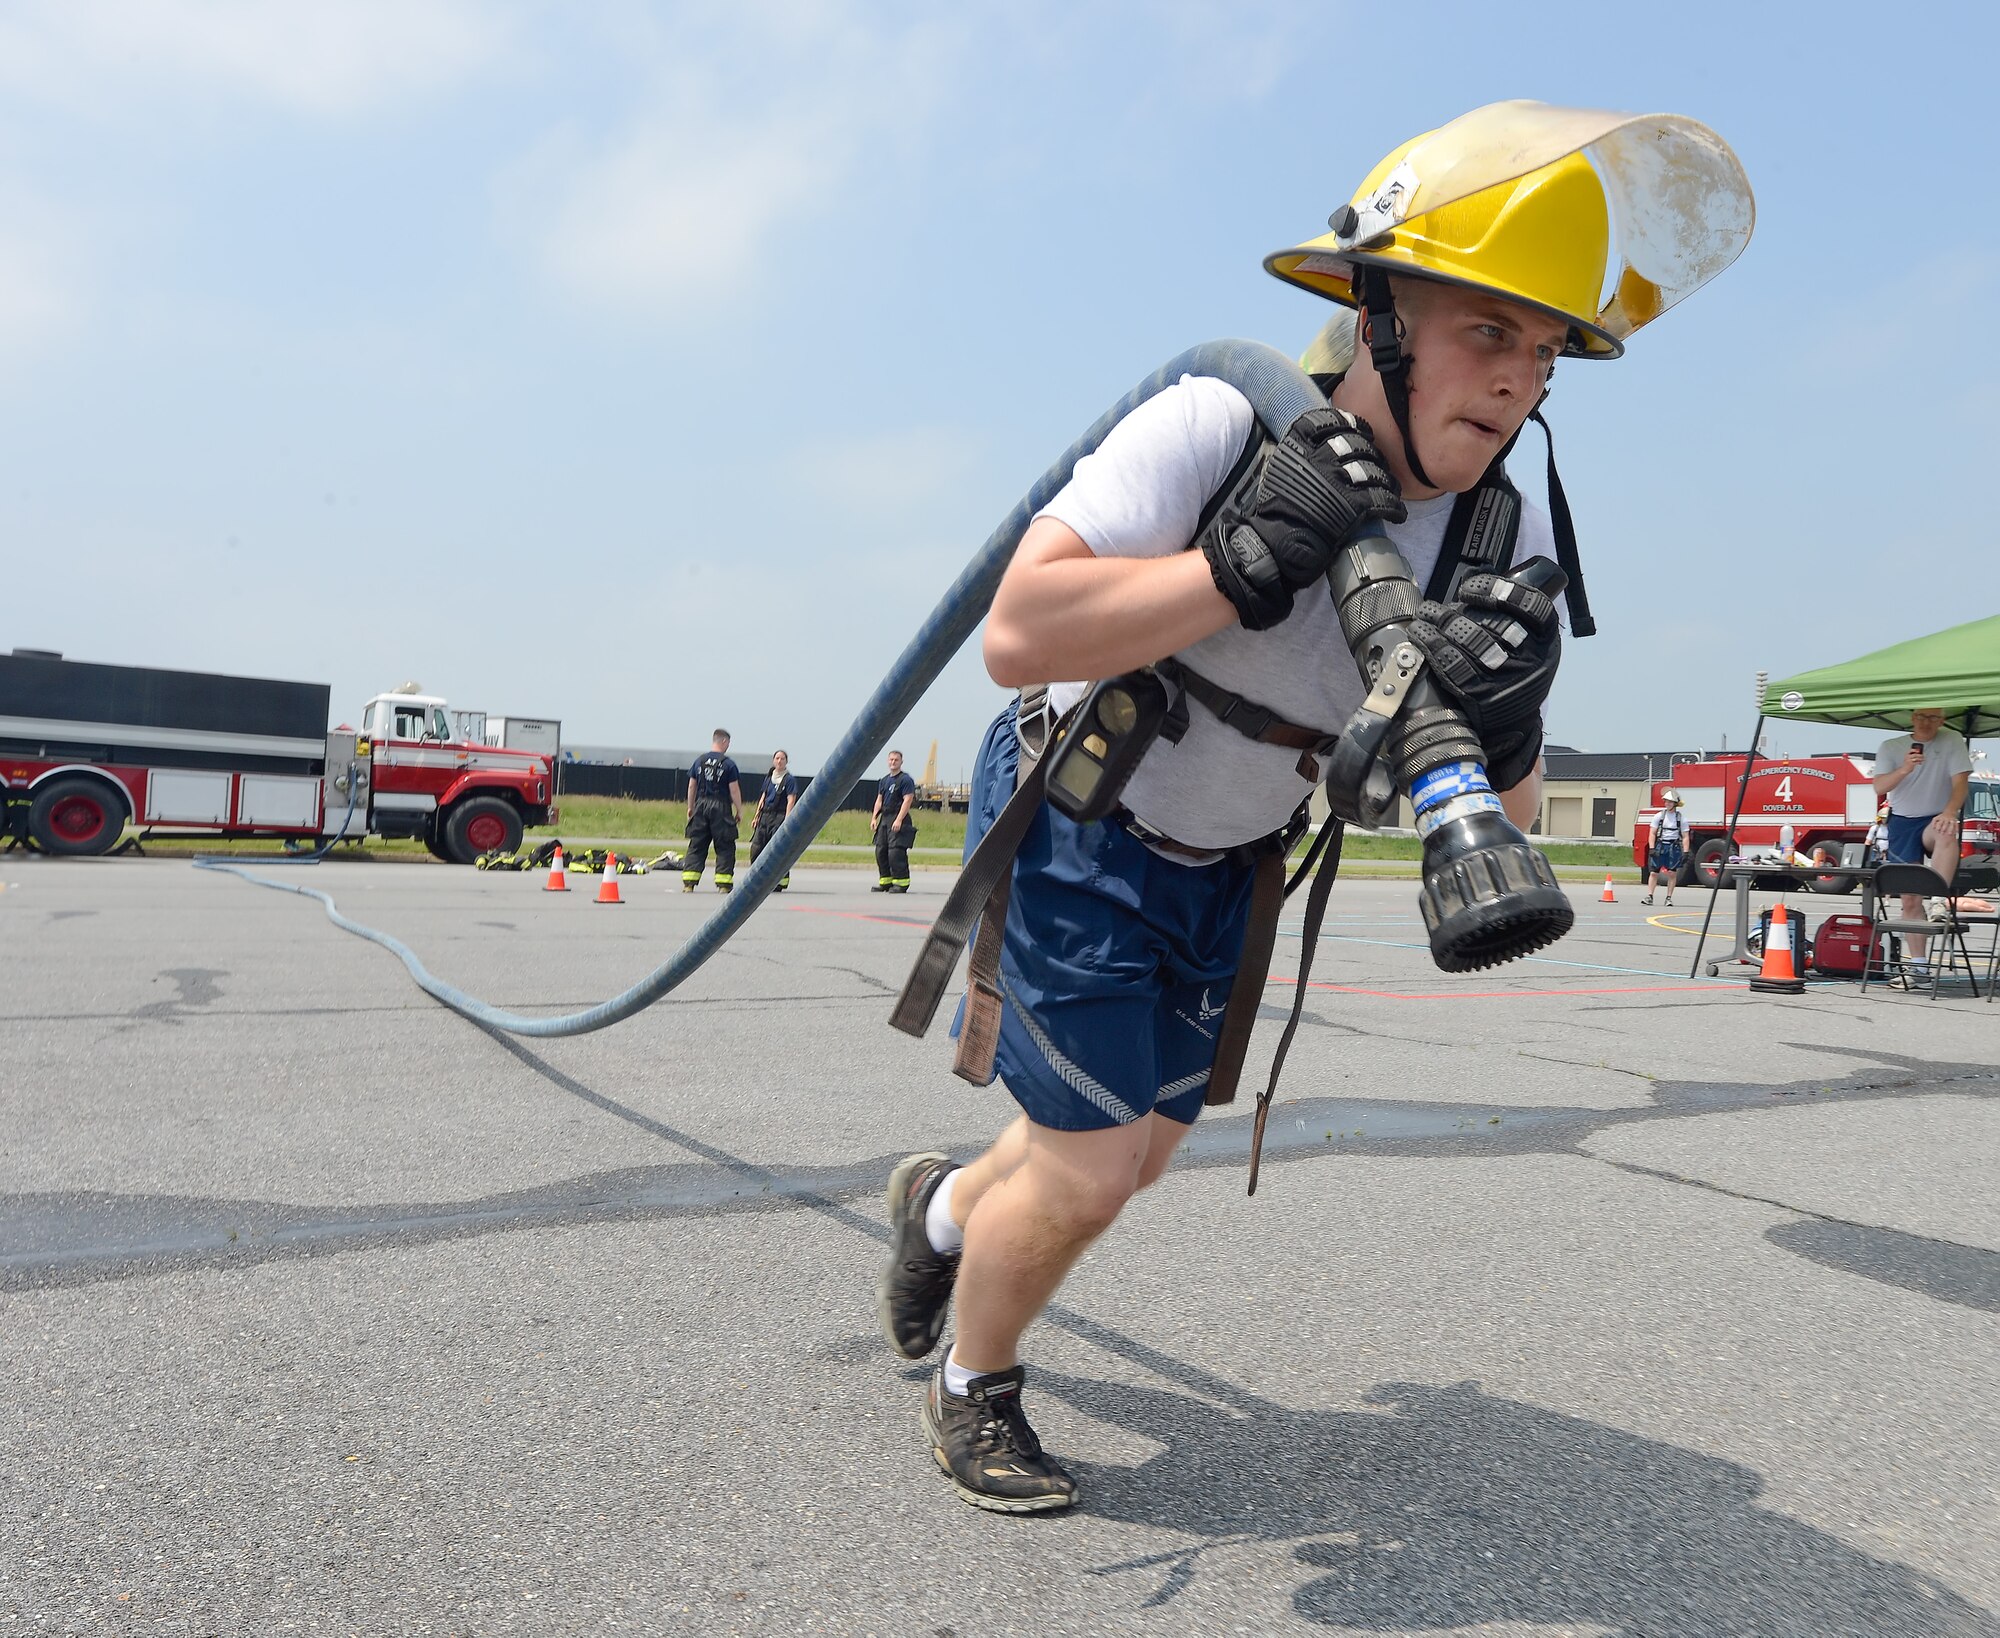 A participant in the Firefighter's Challenge drags a fire hose out to full length during the 2014 Wingman Day at Eagles Nest Park on May 22, 2014, at Dover Air Force Base, Del. Ten, four person teams participated in the fast-paced event while wearing protective equipment.